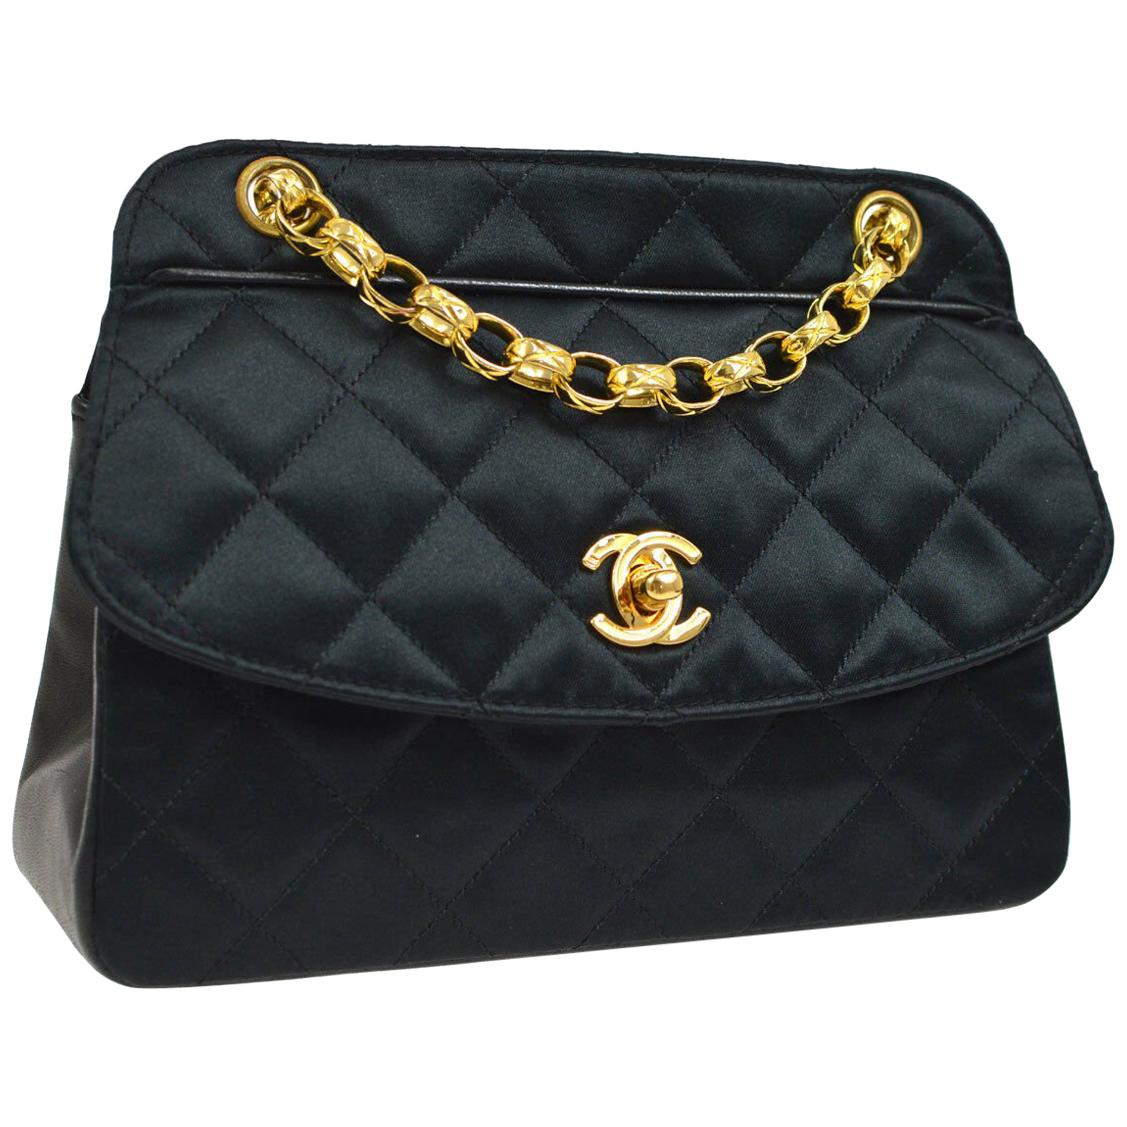 Chanel Black Leather Satin Gold Chain Small Mini Evening Shoulder Flap Bag